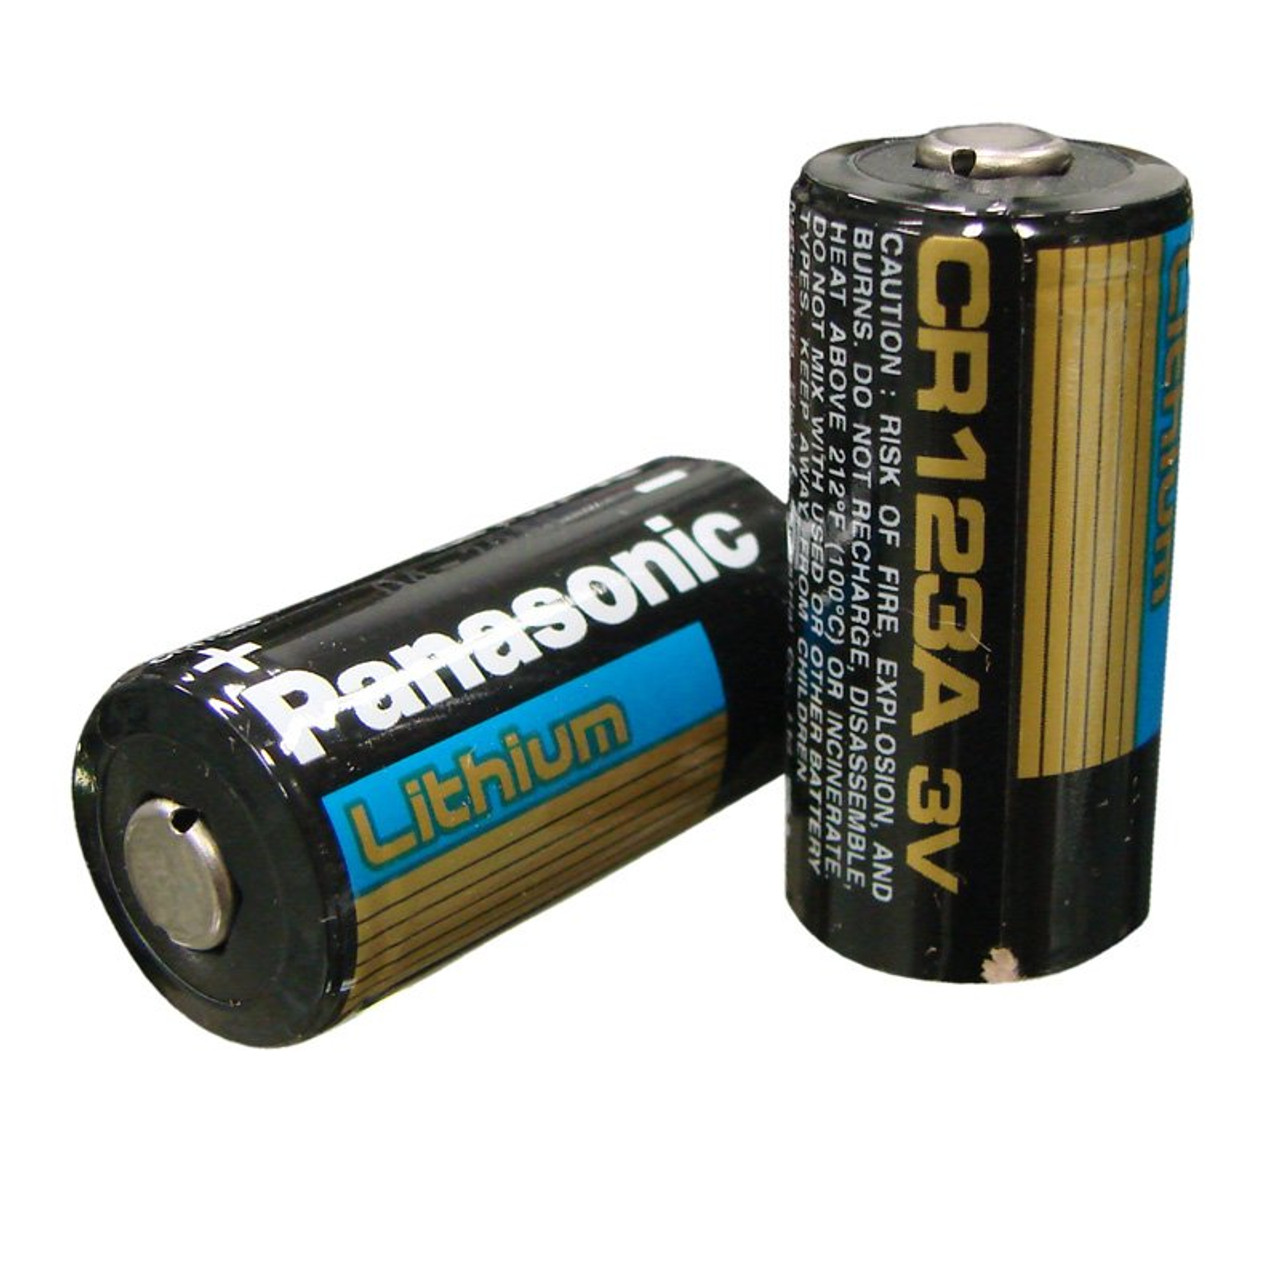 12V4500MAH: Jameco ReliaPro : Lithium Ion Rechargeable Battery